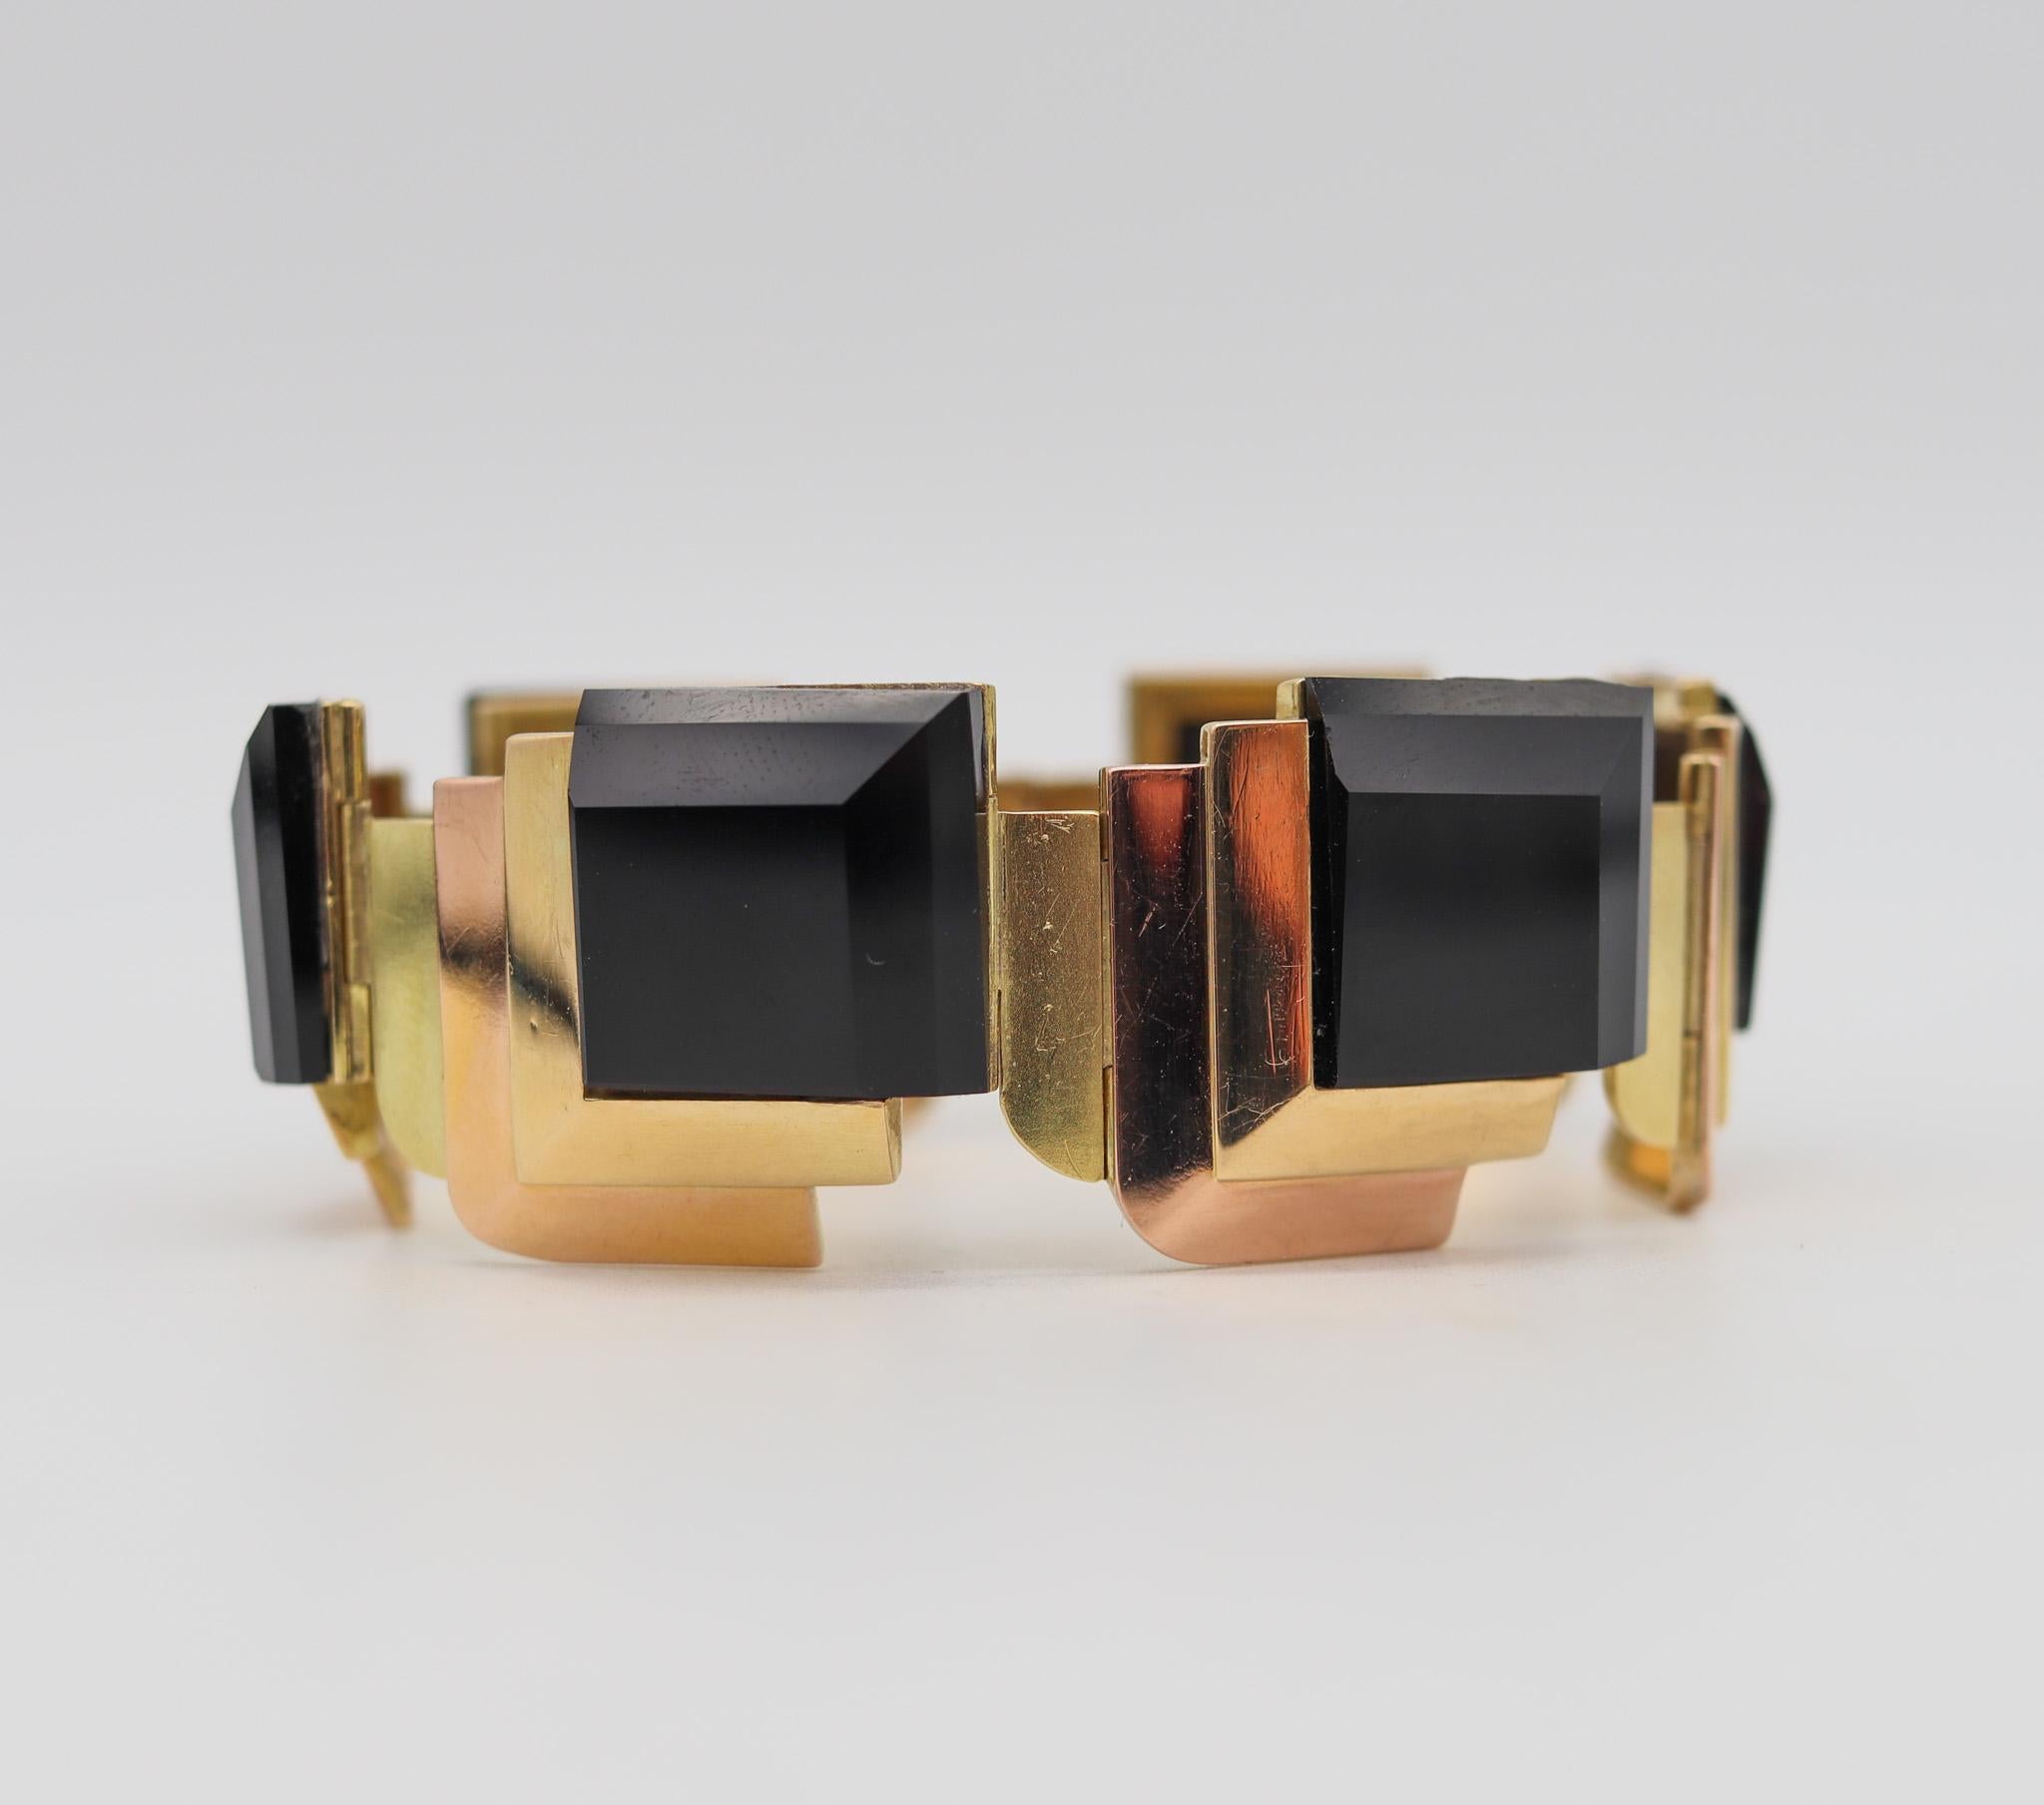 French art deco geometric stepped bracelet.

Very elegant and unusual geometric bracelet, created in Paris France during the art deco period, back in the 1930. Crafted with squared patterns in two tones of solid yellow gold of 18 karats with high